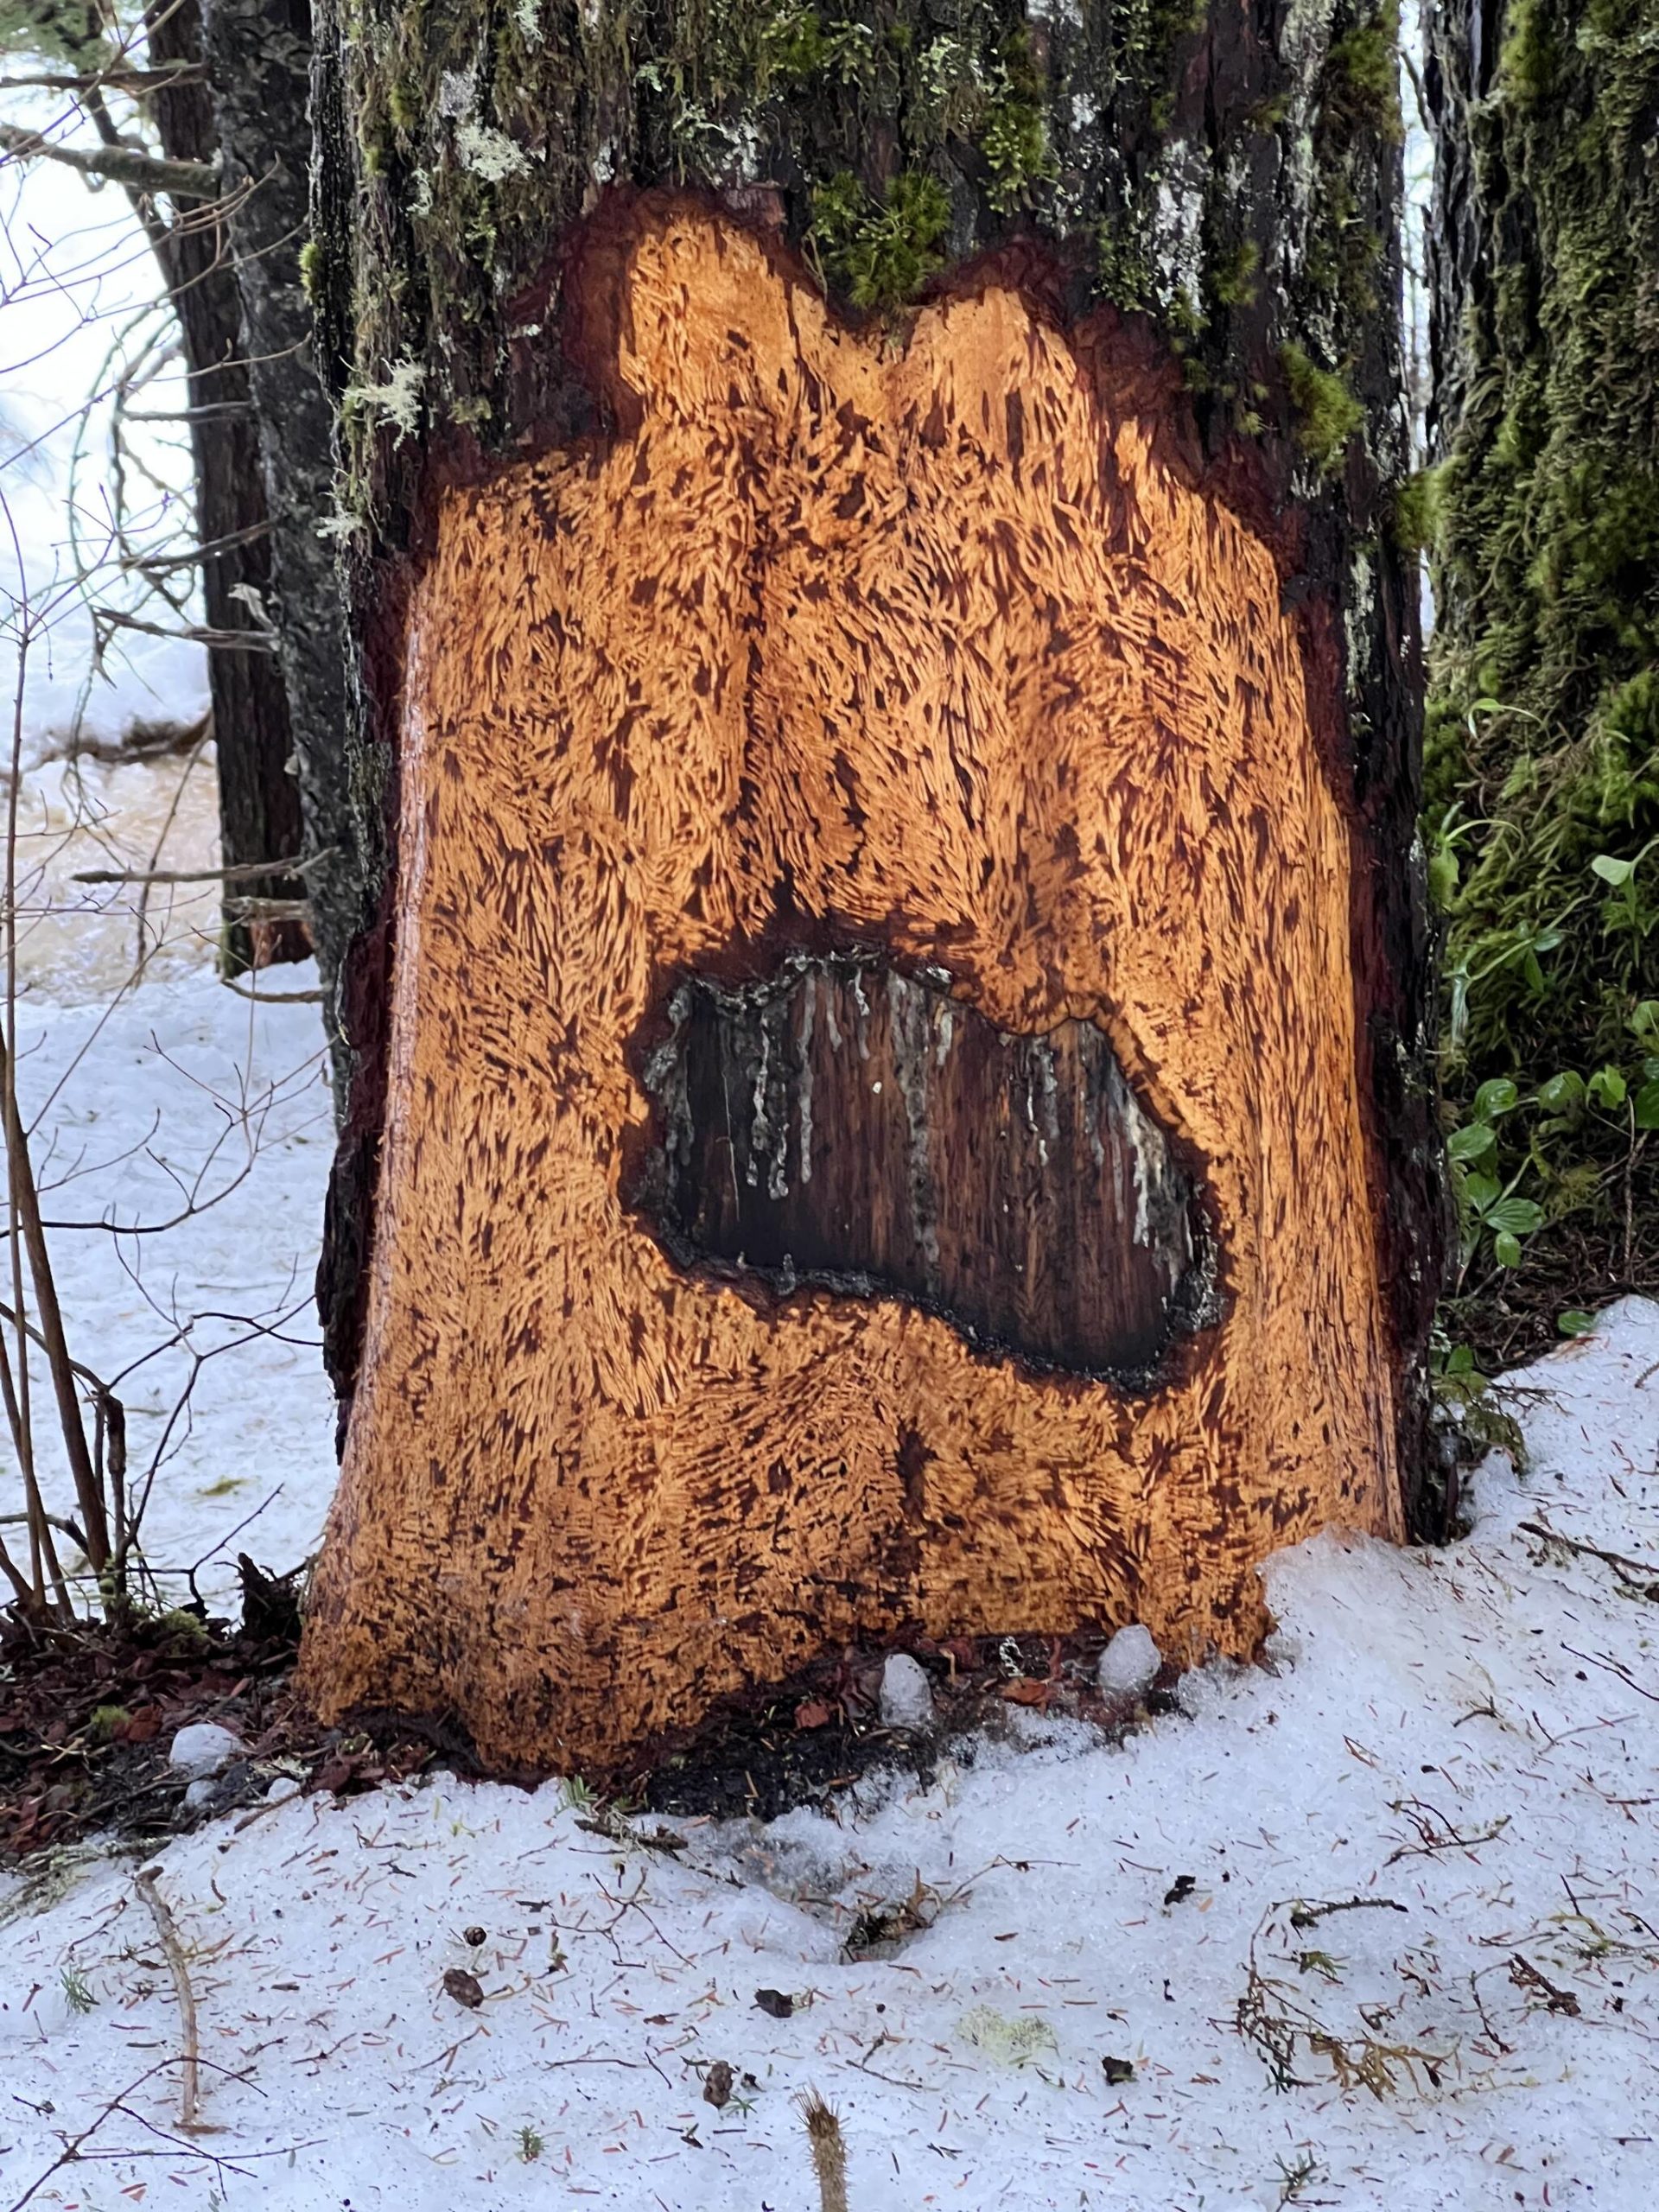 “On the Kayaker’s Beach stretch of trail, there were several trees that were chewed on by porcupines,” writes Deana Barajas. “I liked this one the most because it looks like an eye.” (Courtesy Photo / Deana Barajas)